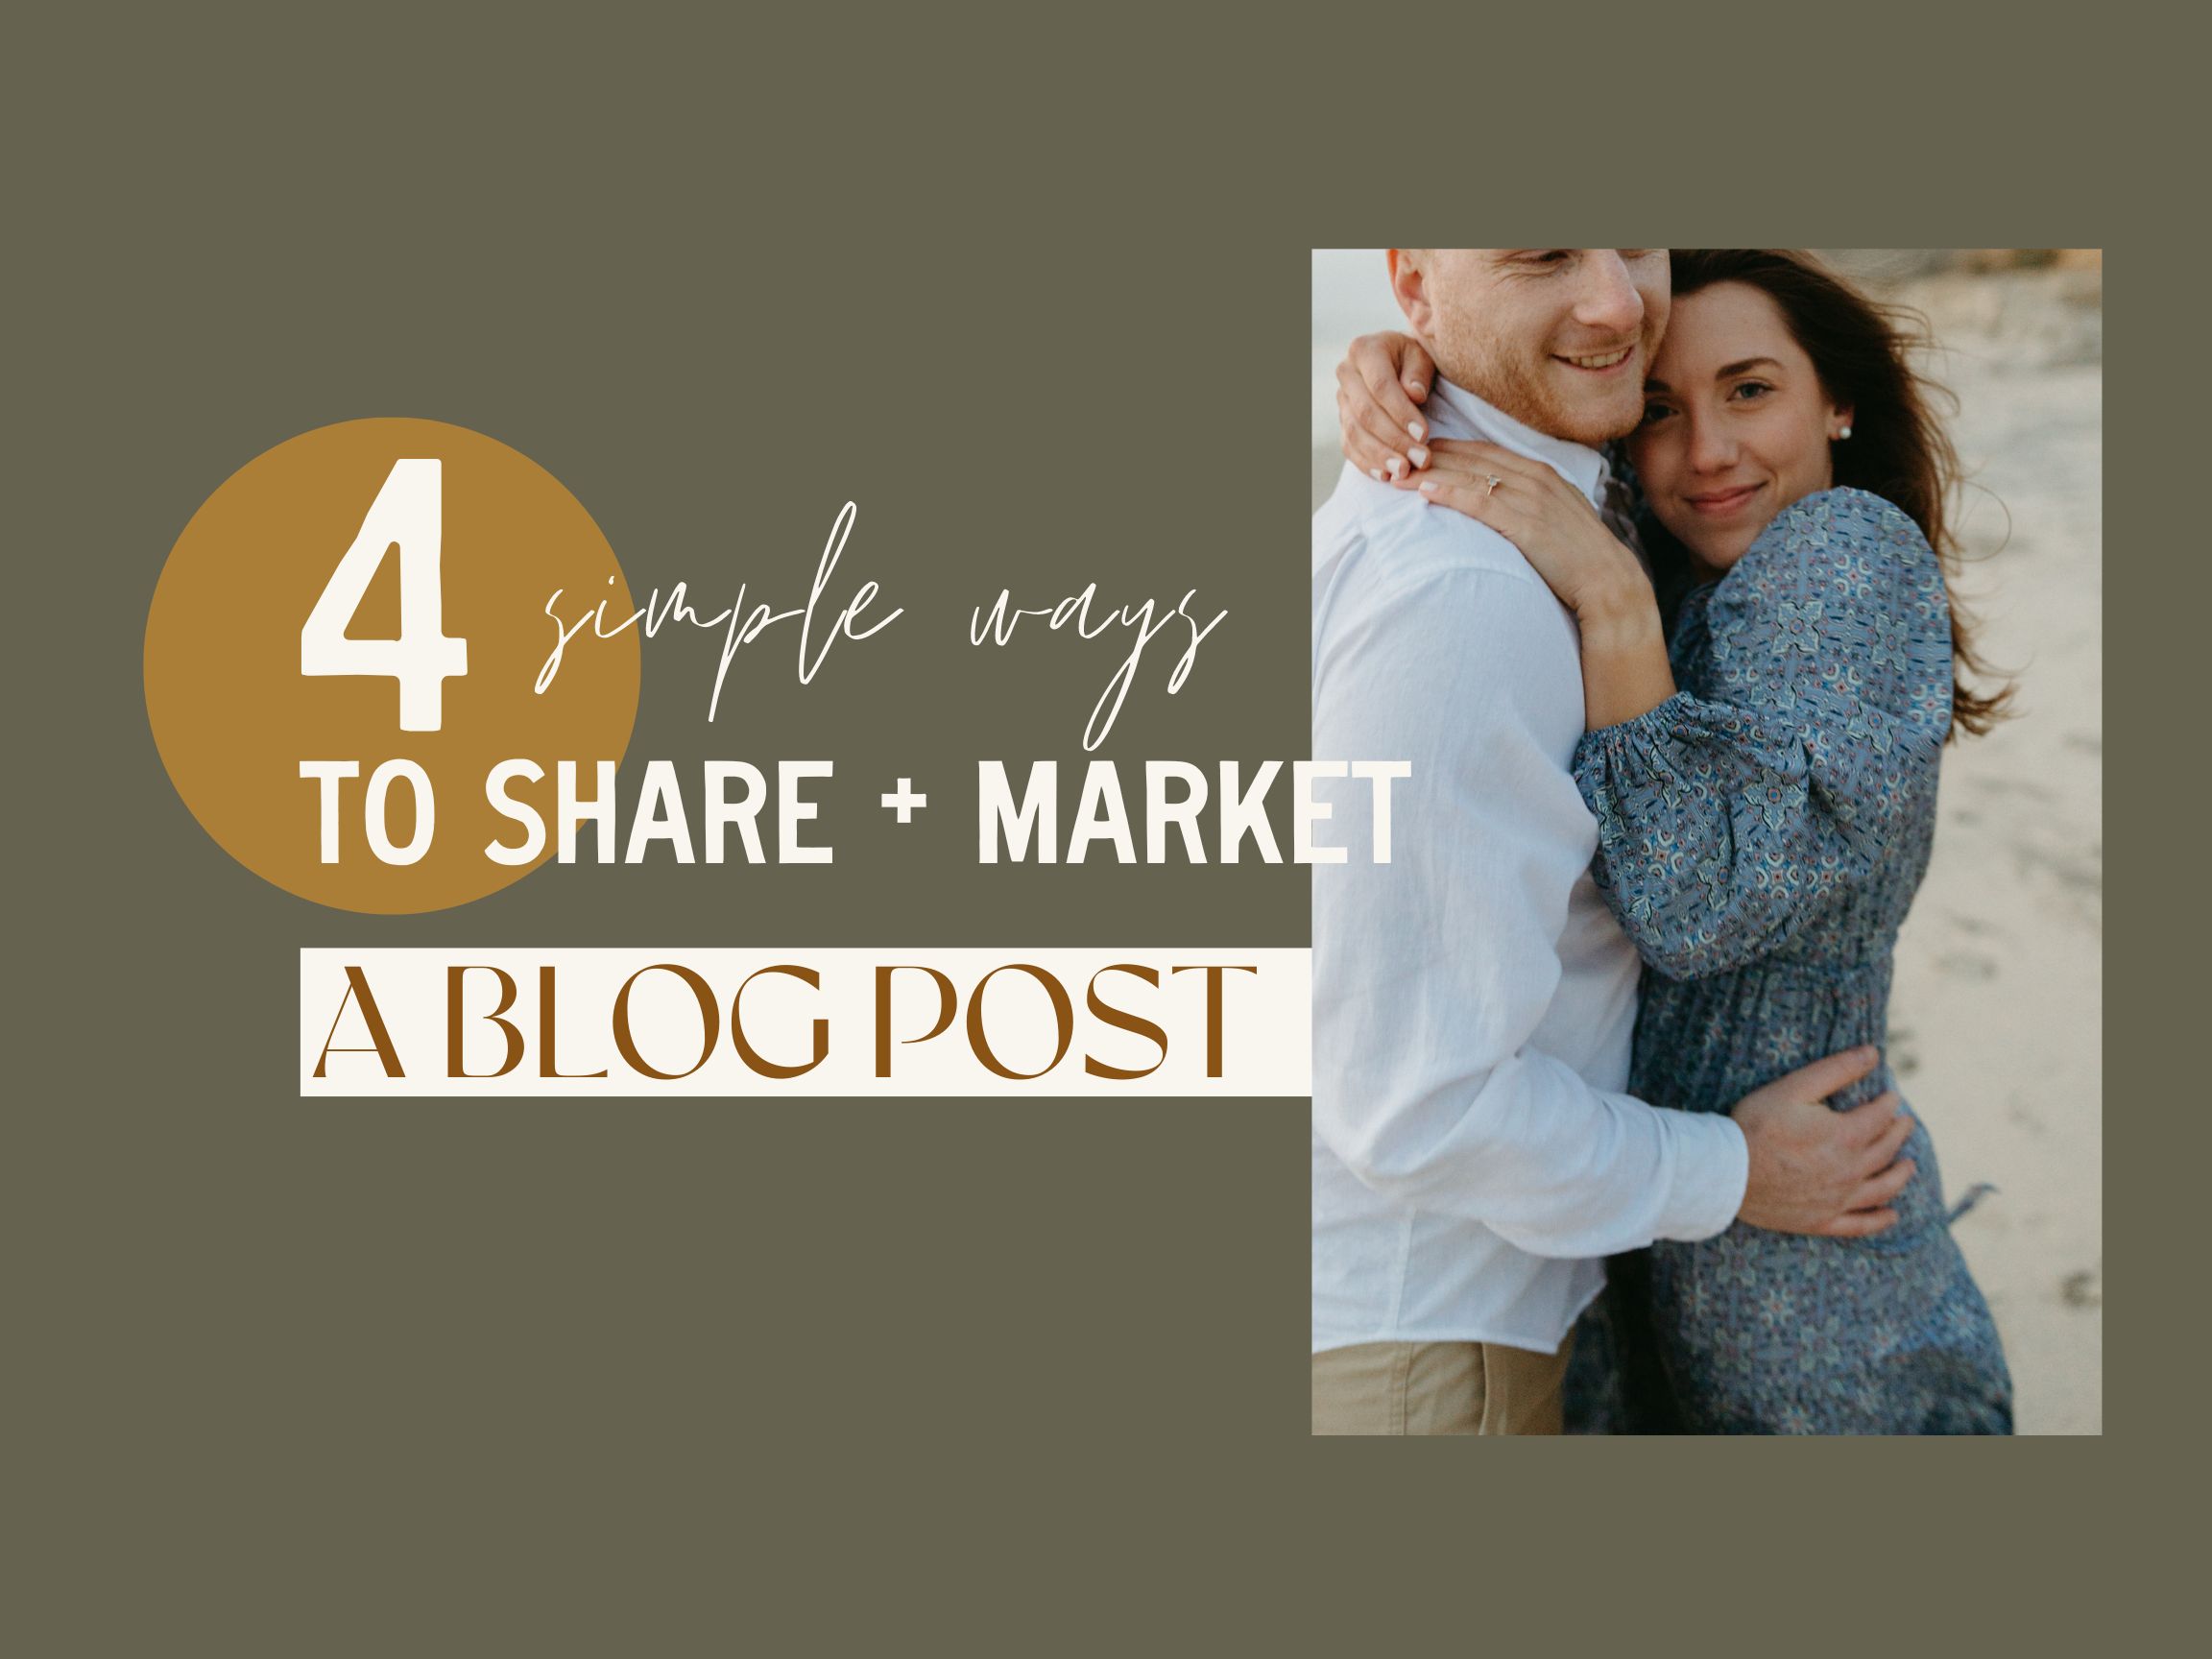 Marketing your blog post for photographers and wedding professionals